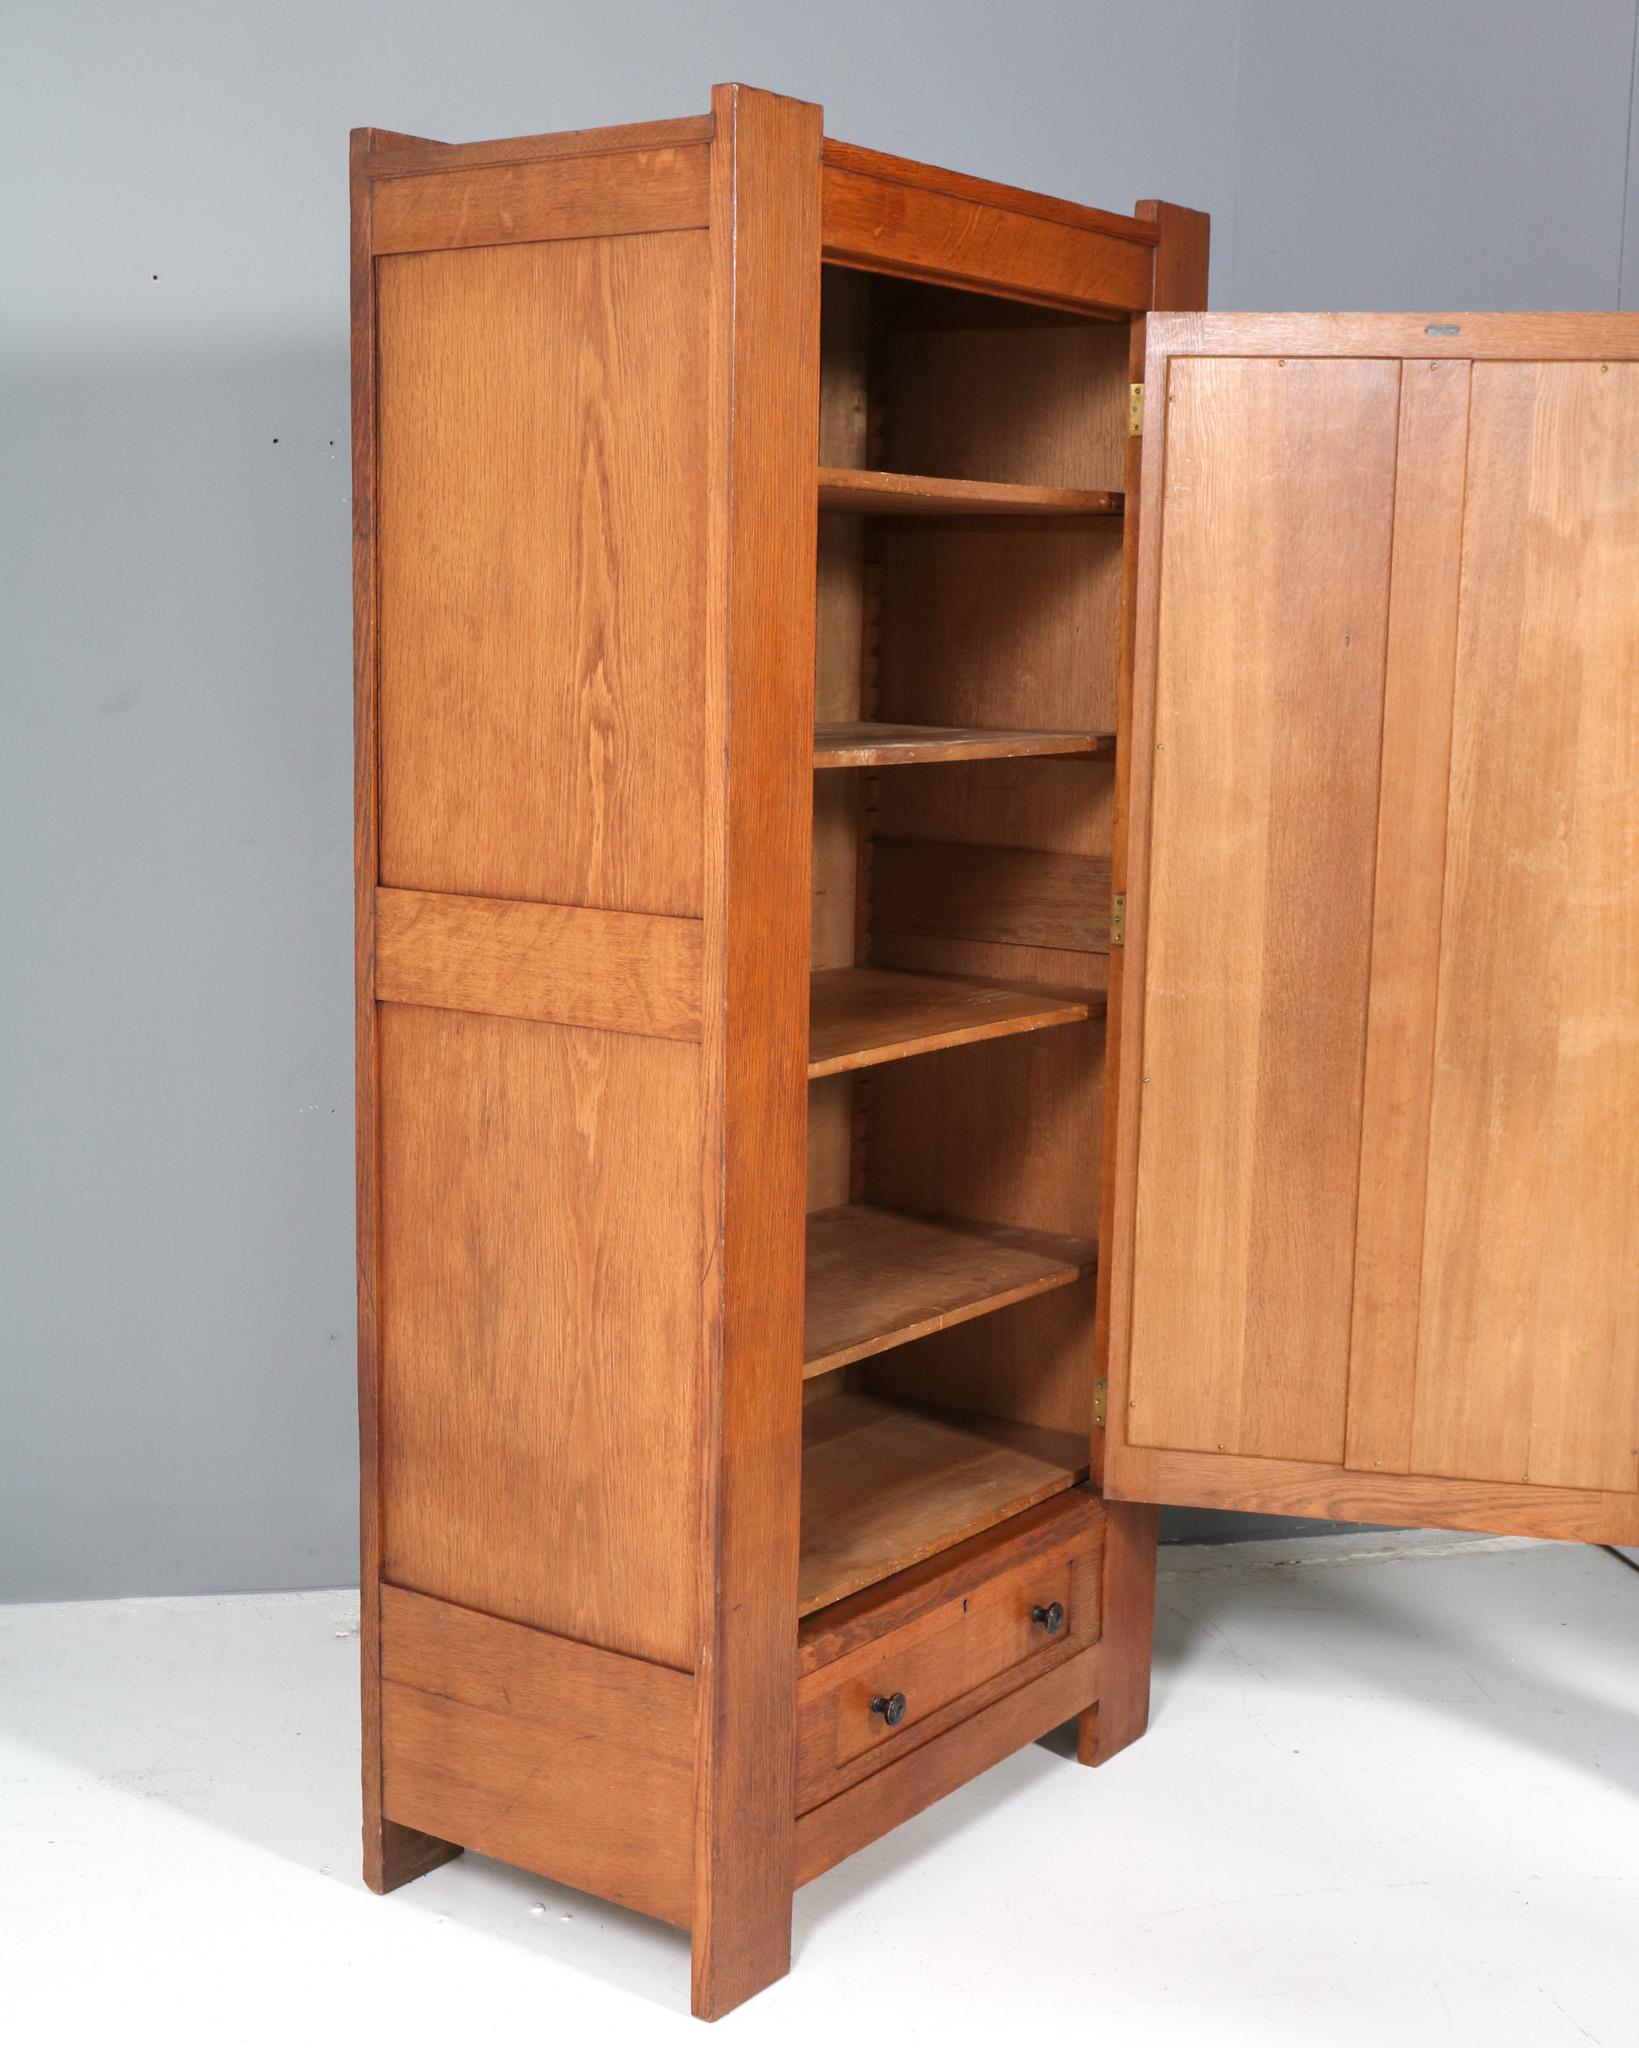  Art Deco Modernist Oak Armoire or Wardrobe by Hendrik Wouda for Pander, 1924 In Good Condition For Sale In Amsterdam, NL